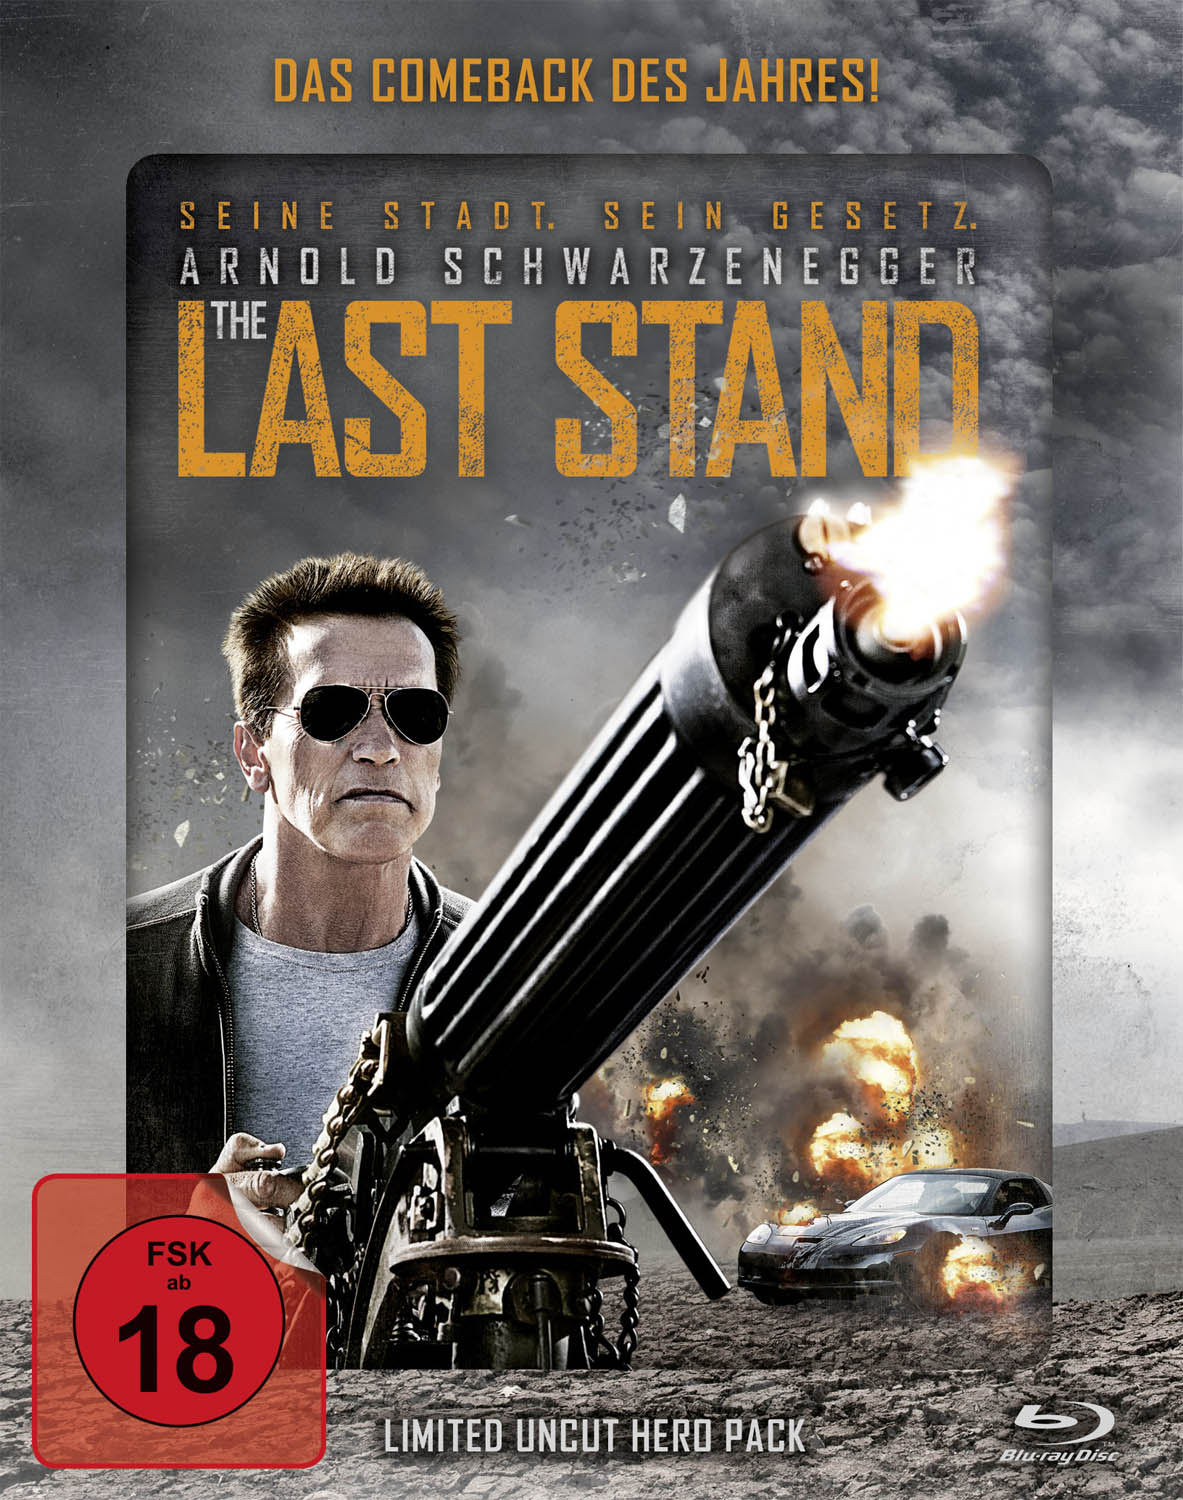 The Last Stand #8